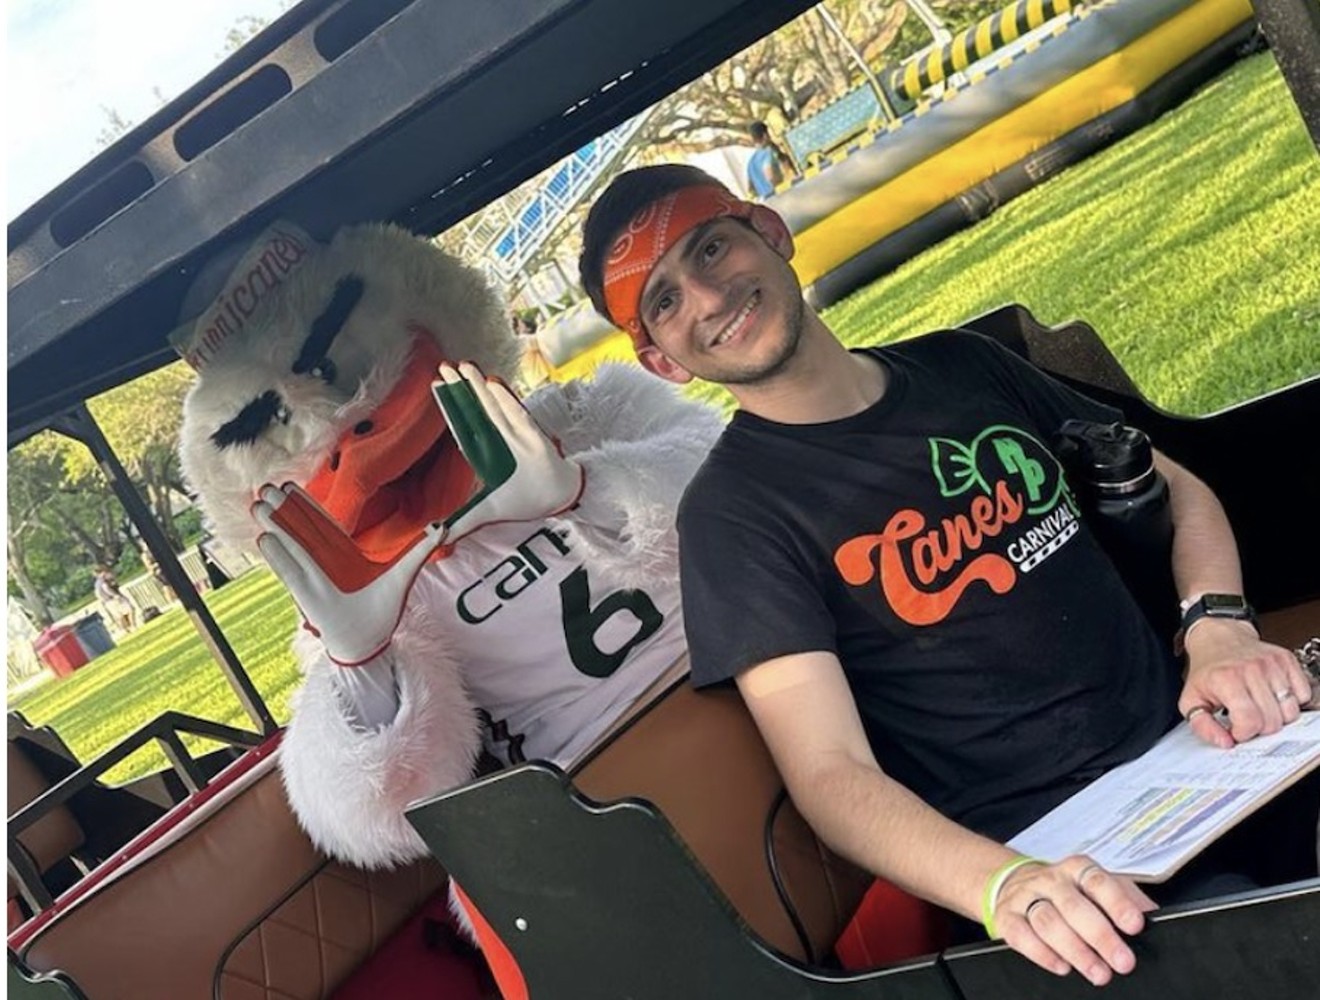 Daniel "Danny" Bishop, a University of Miami senior, was hit and killed by a car while driving his scooter to campus.